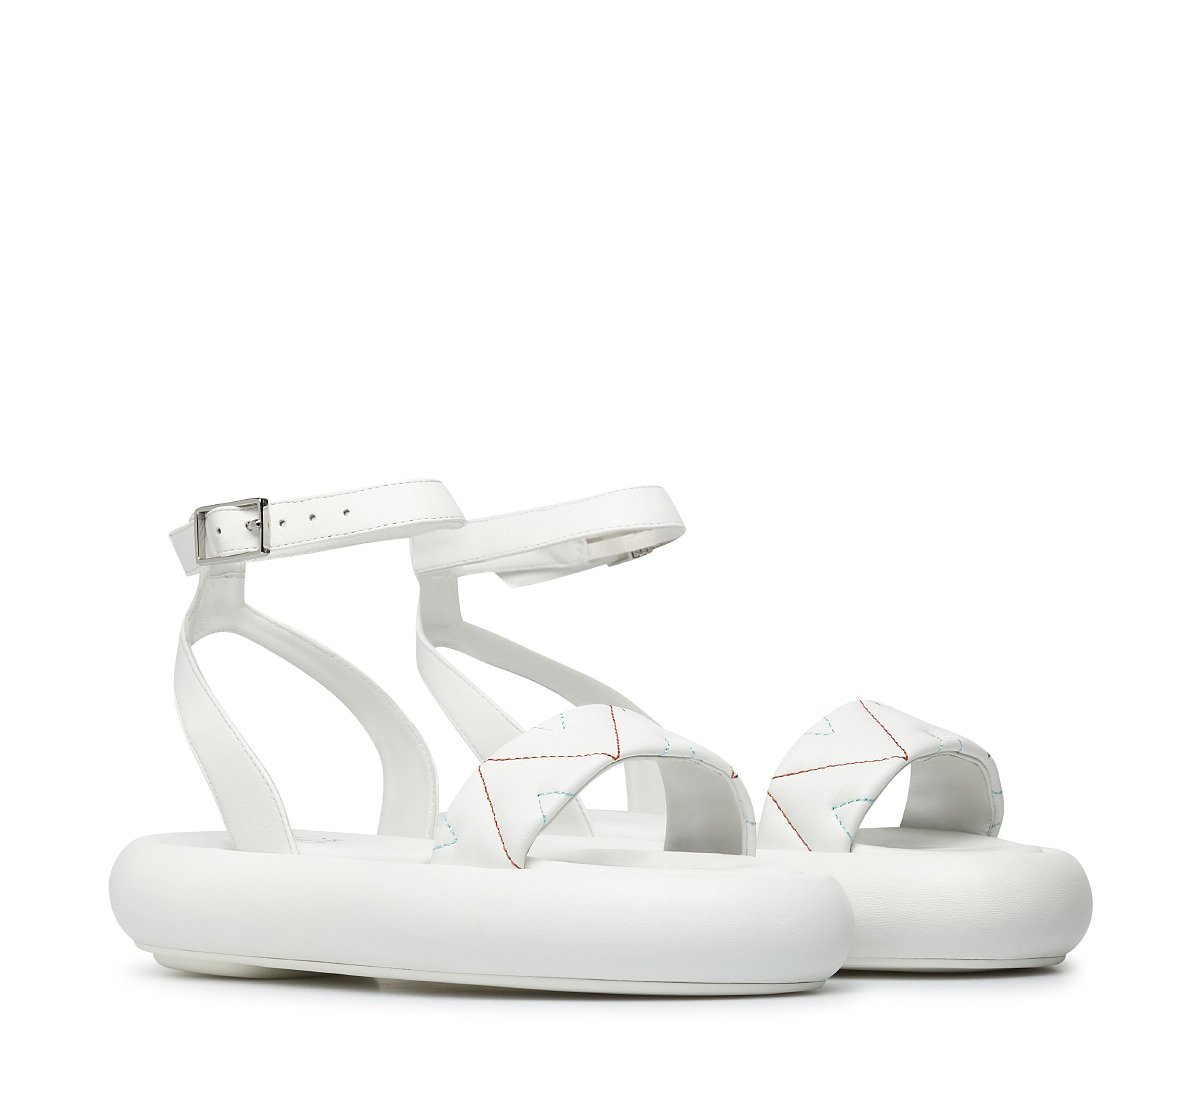 Leather sandals with platform sole